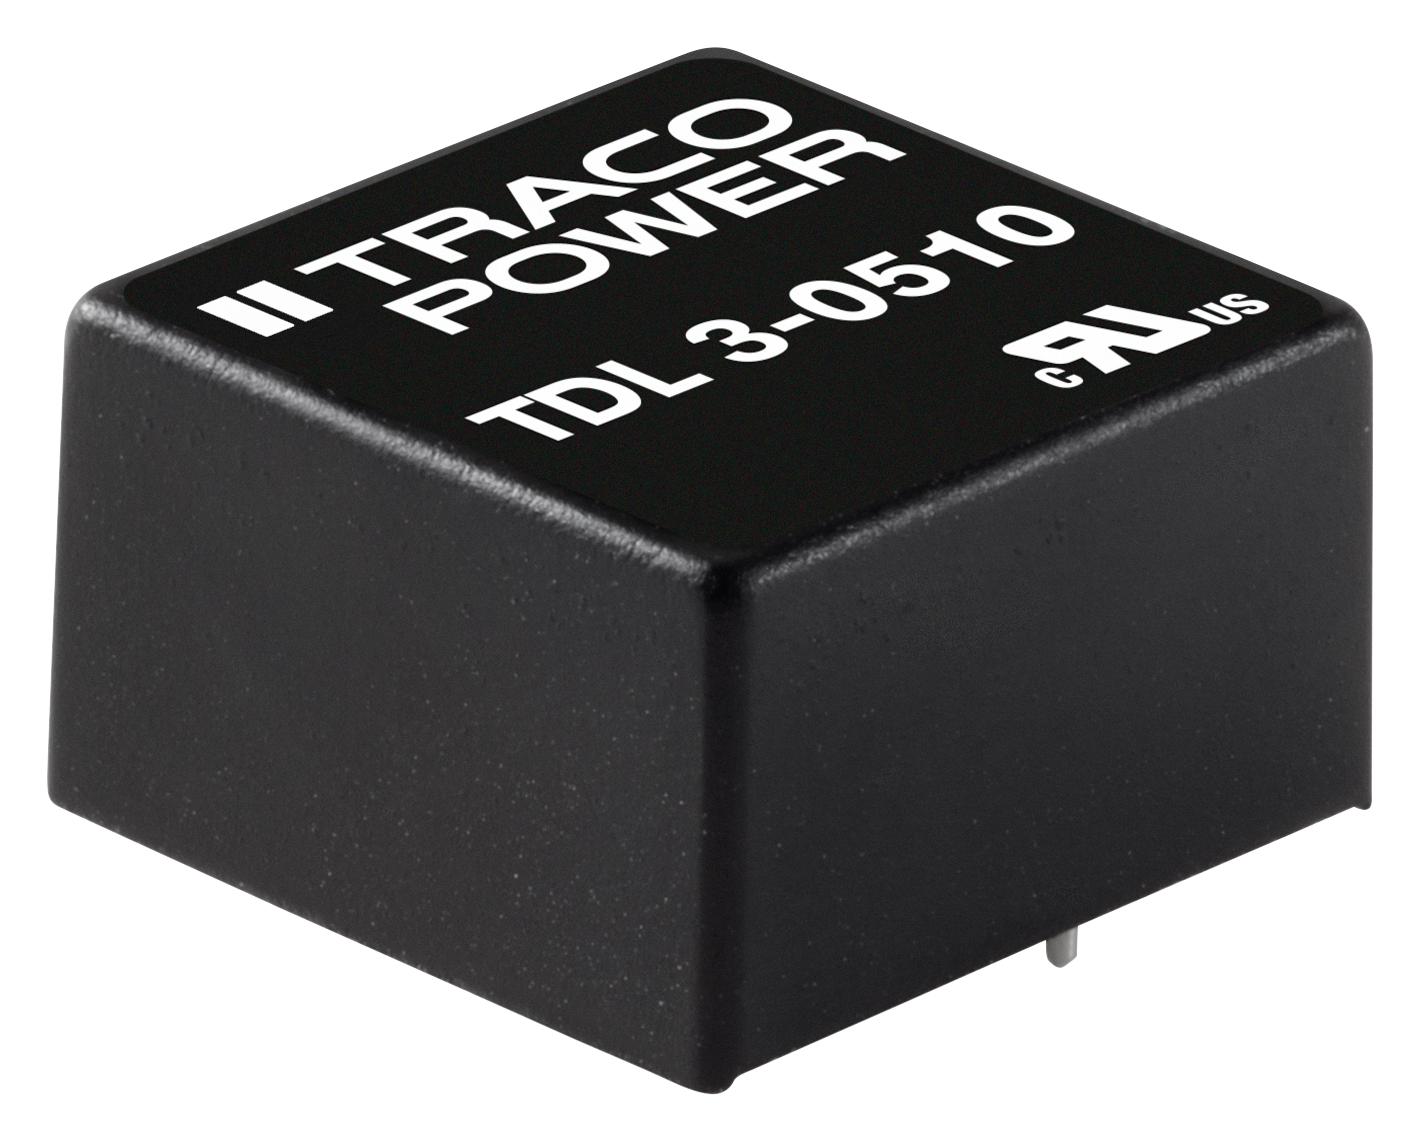 TDL 3-2422 DC-DC CONVERTER, 2 O/P, 3W TRACO POWER